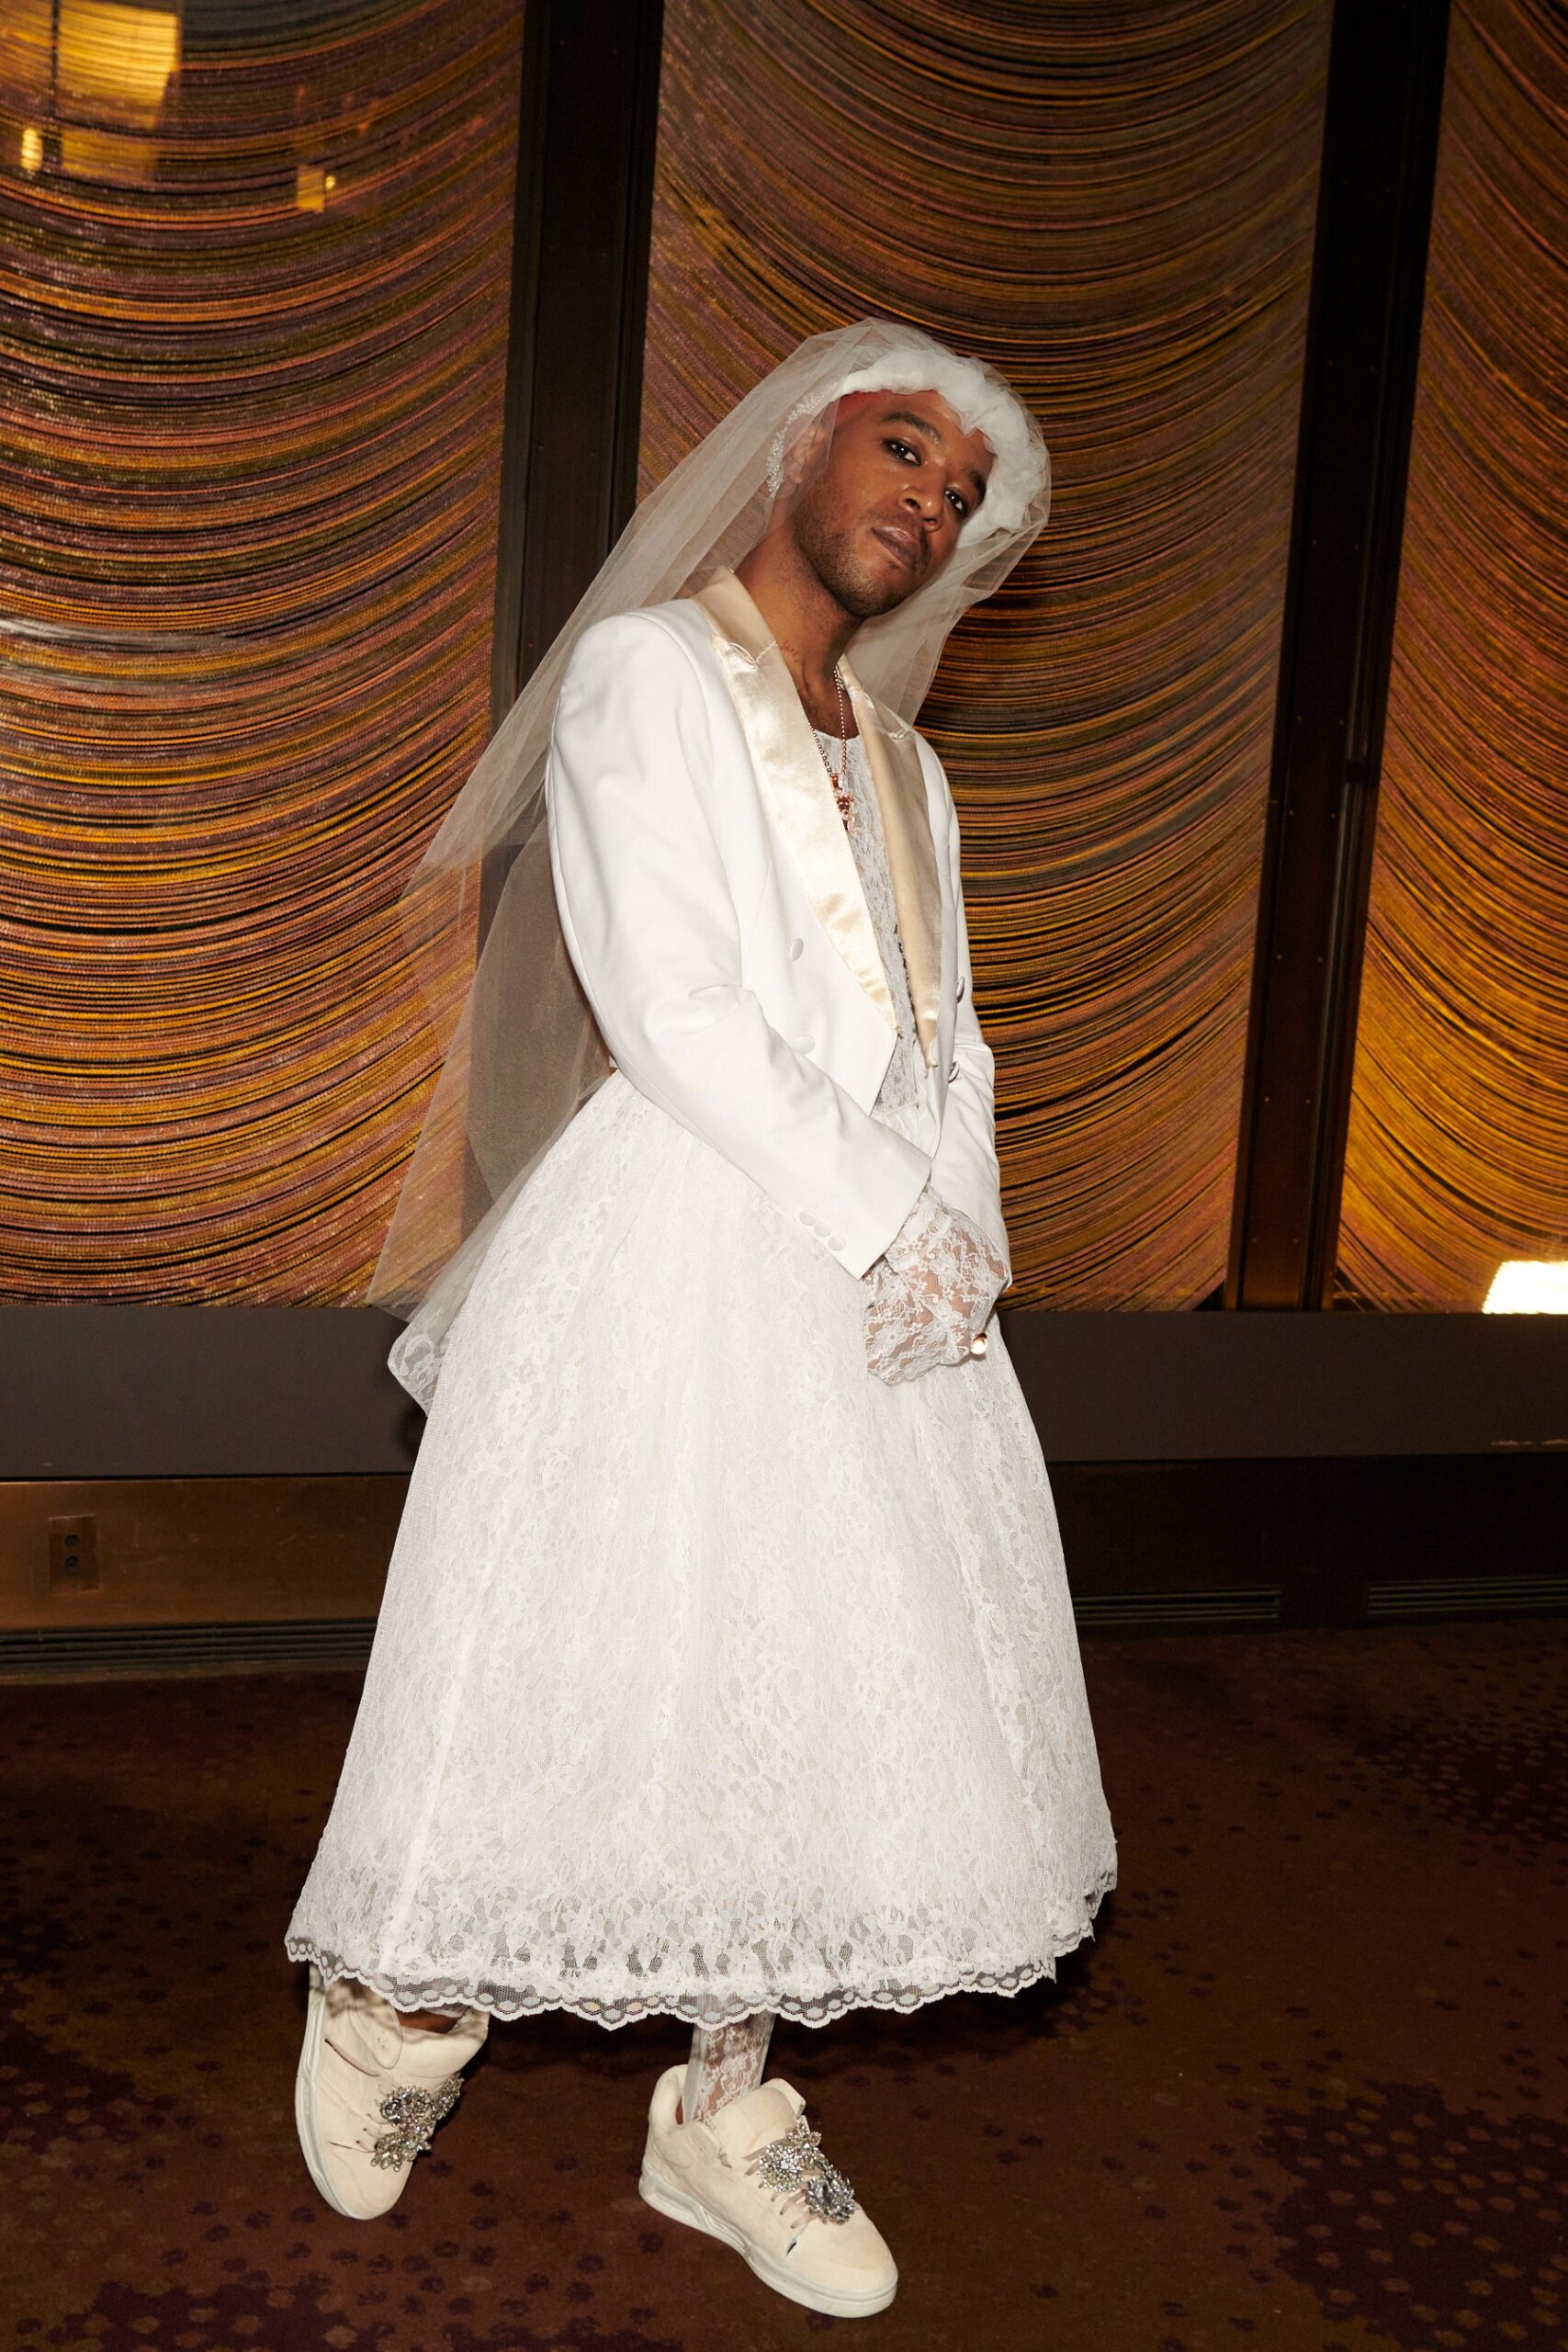 Kid Cudi’s Wedding Gown Used to be the CFDA Awards’ Boldest Search